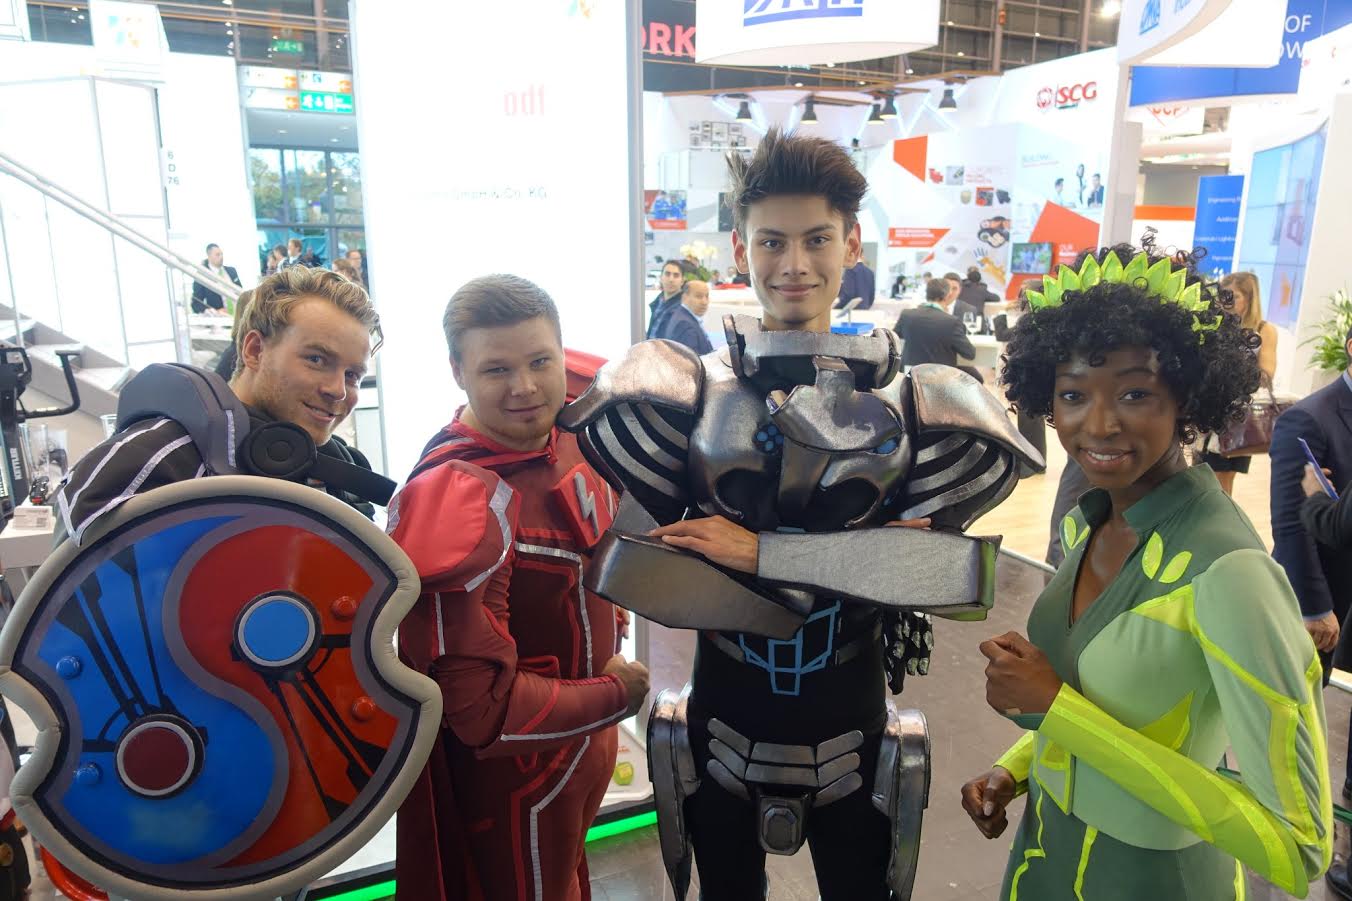 ‘The Technyl Force’ is Solvay’s latest superhero-themed campaign grabbing plenty of attention at the K 2016 plastics show. © Technyl Force